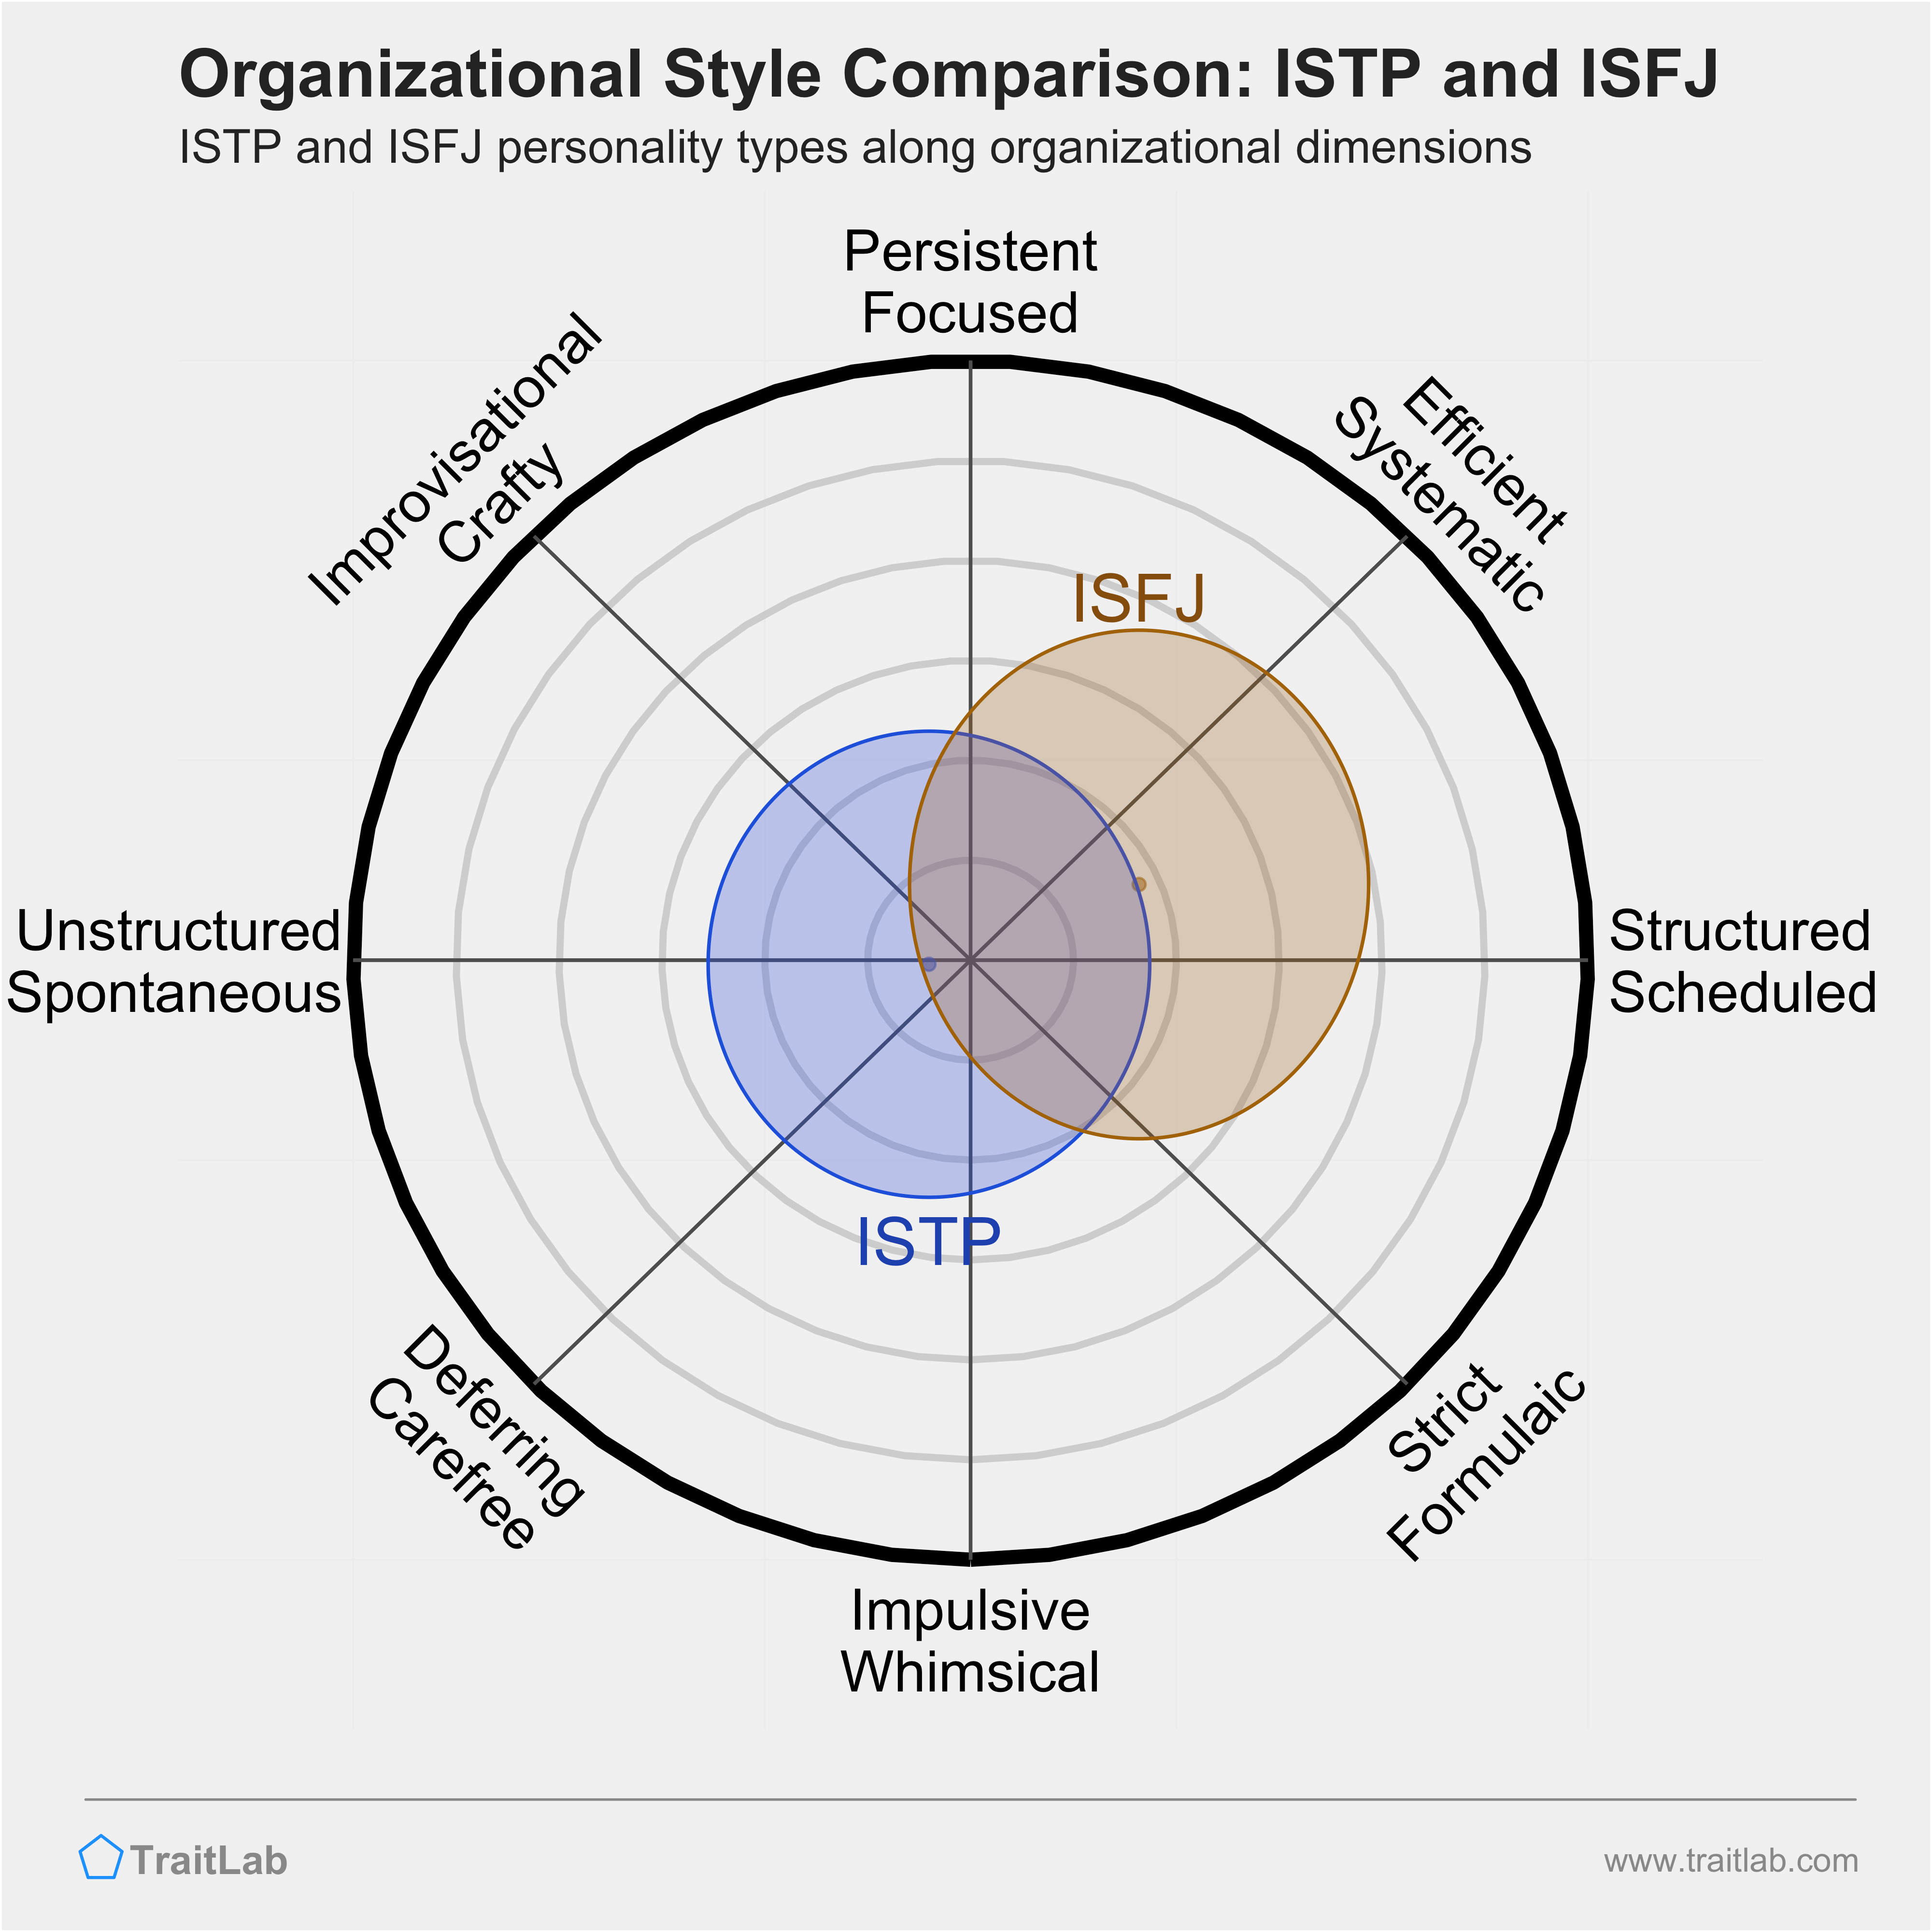 ISTP and ISFJ comparison across organizational dimensions